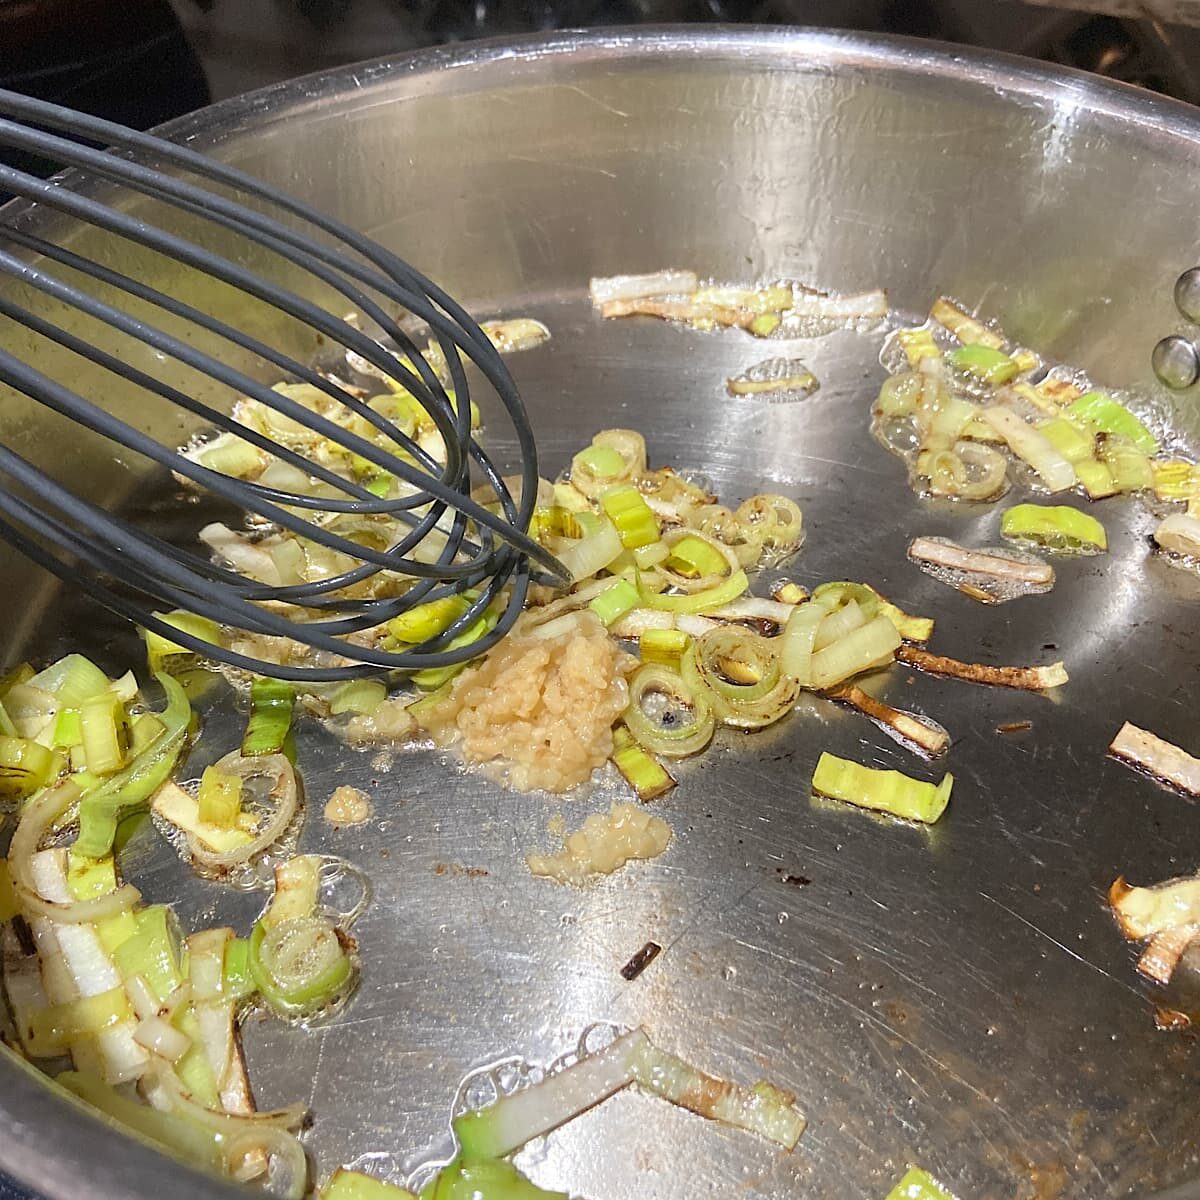 Add garlic to leeks and stir and cook